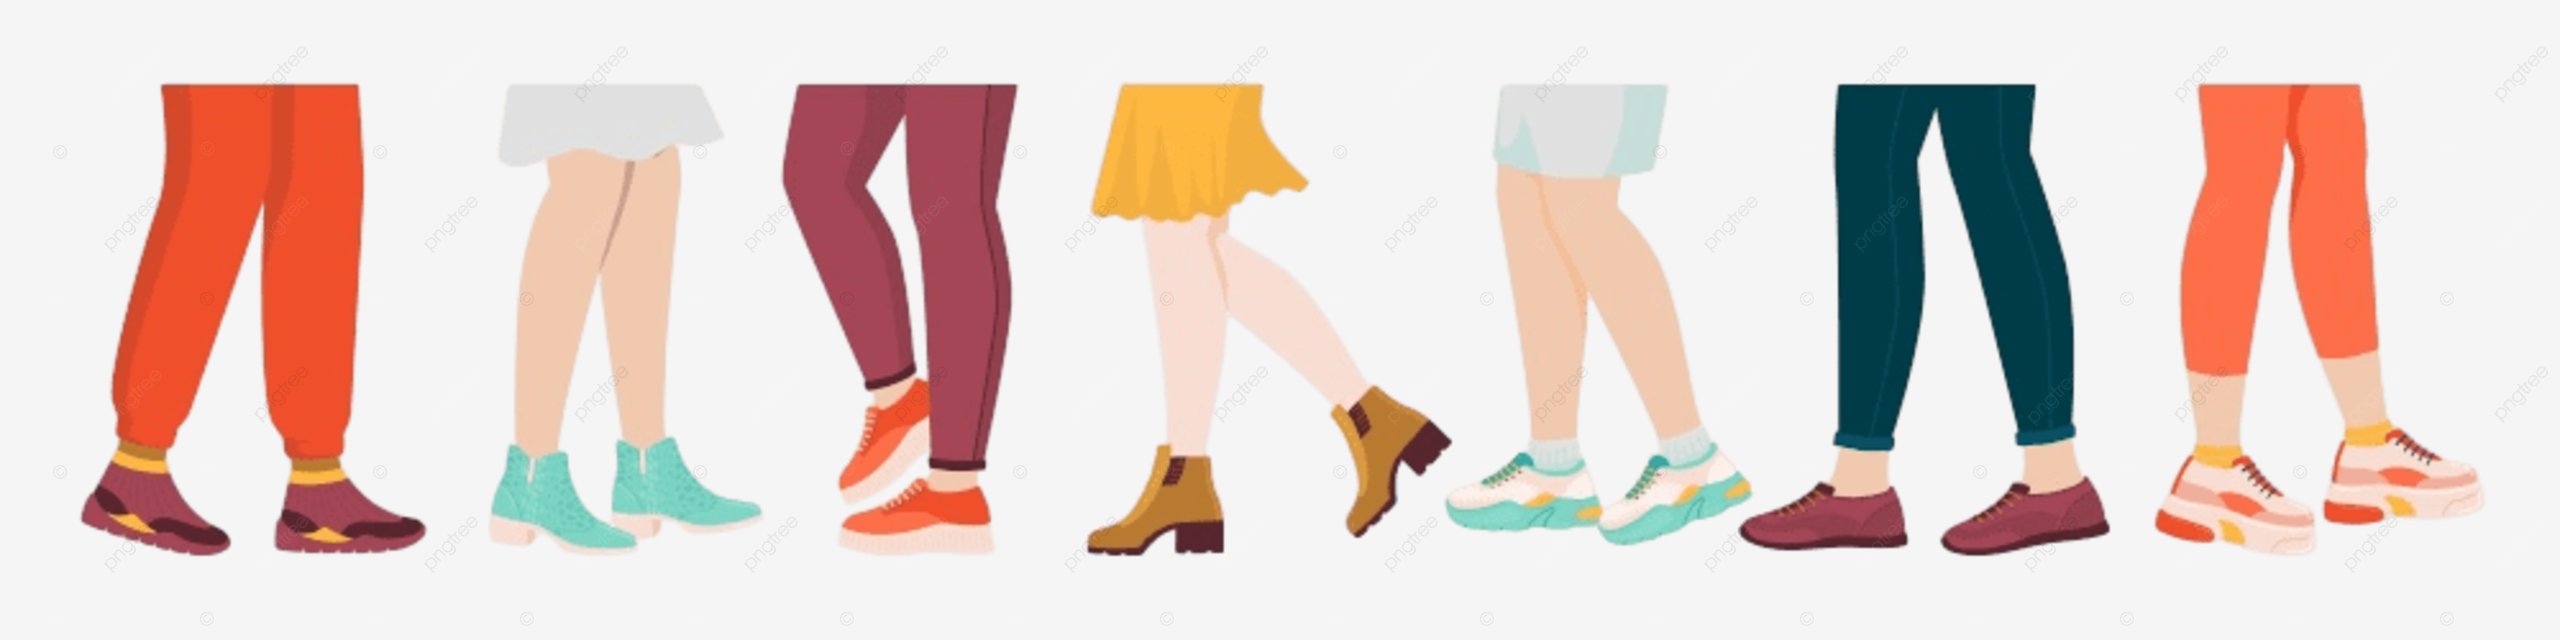 Legs shoes vector hd png images shoes on legs cartoon sport how with socks png image for free download